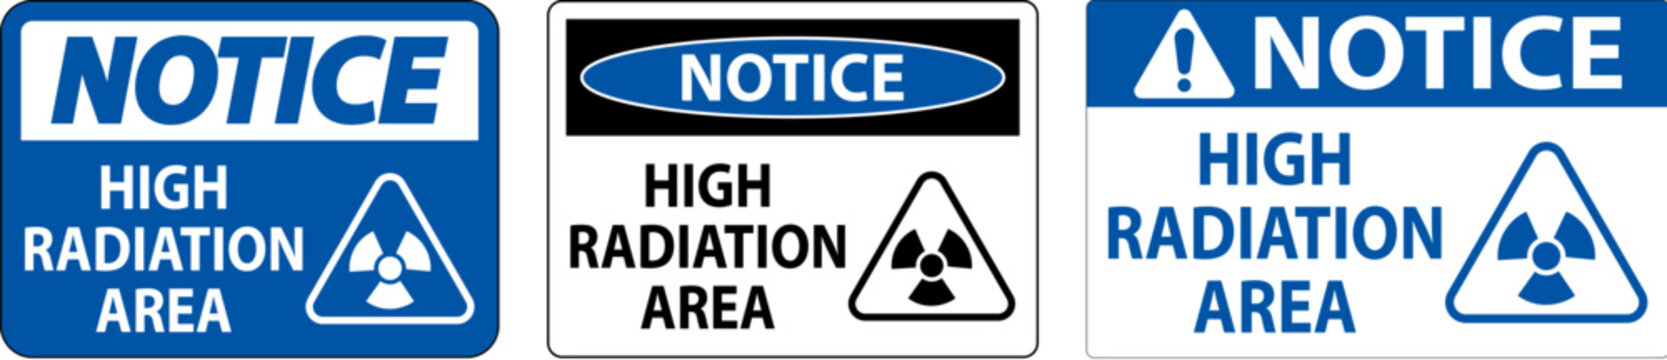 Notice High Radiation Area Sign On White Background